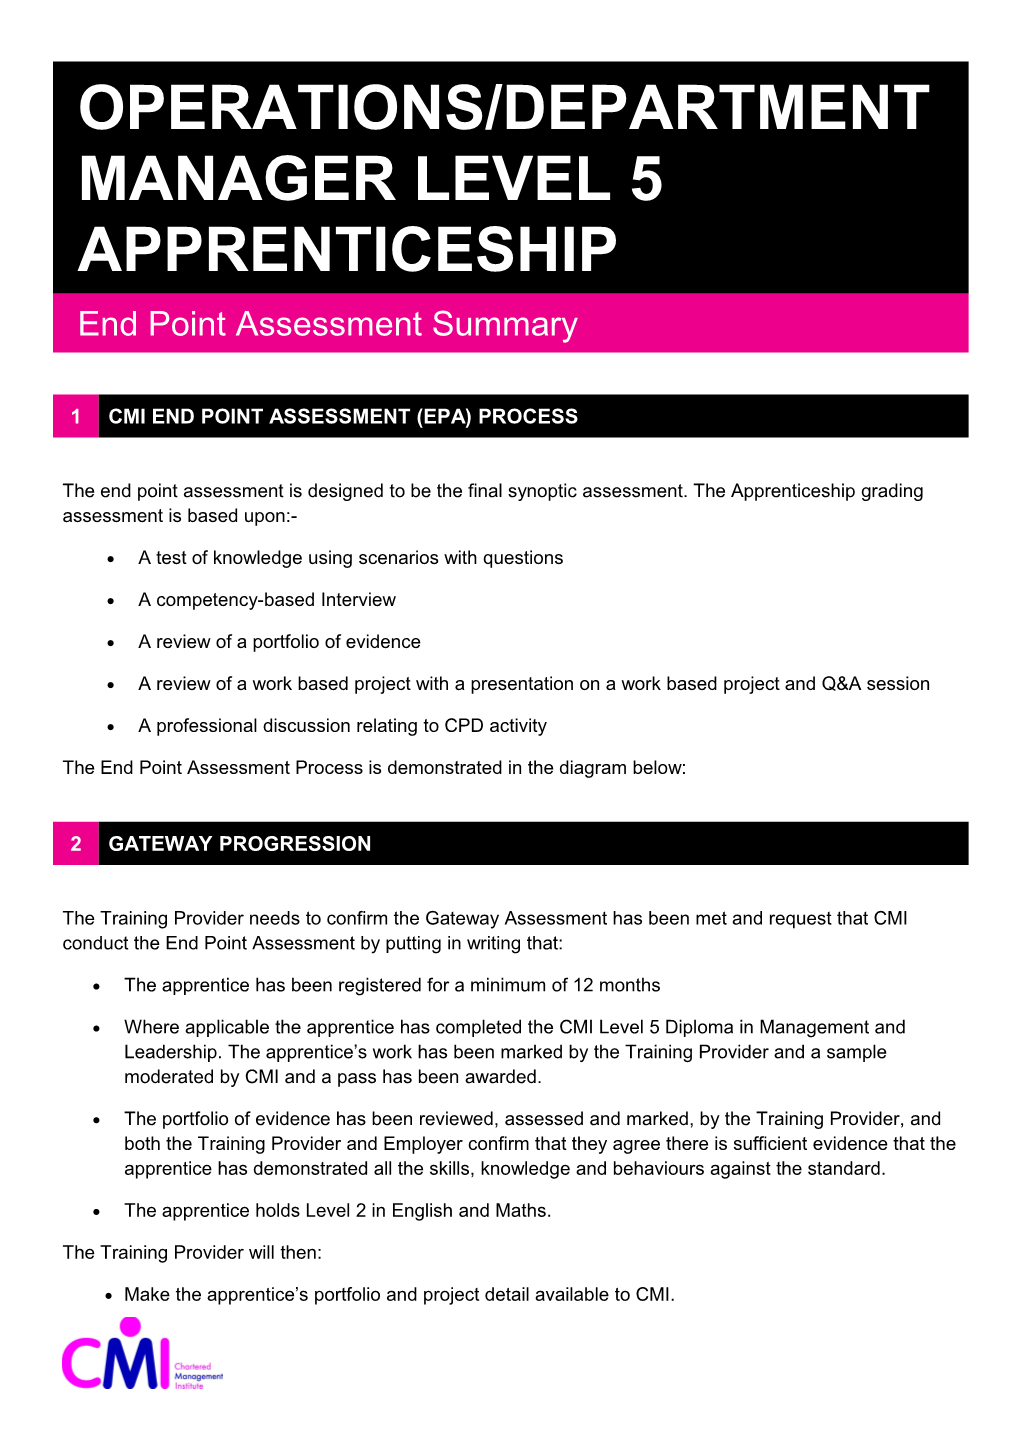 The End Point Assessment Is Designed to Be the Final Synoptic Assessment. the Apprenticeship